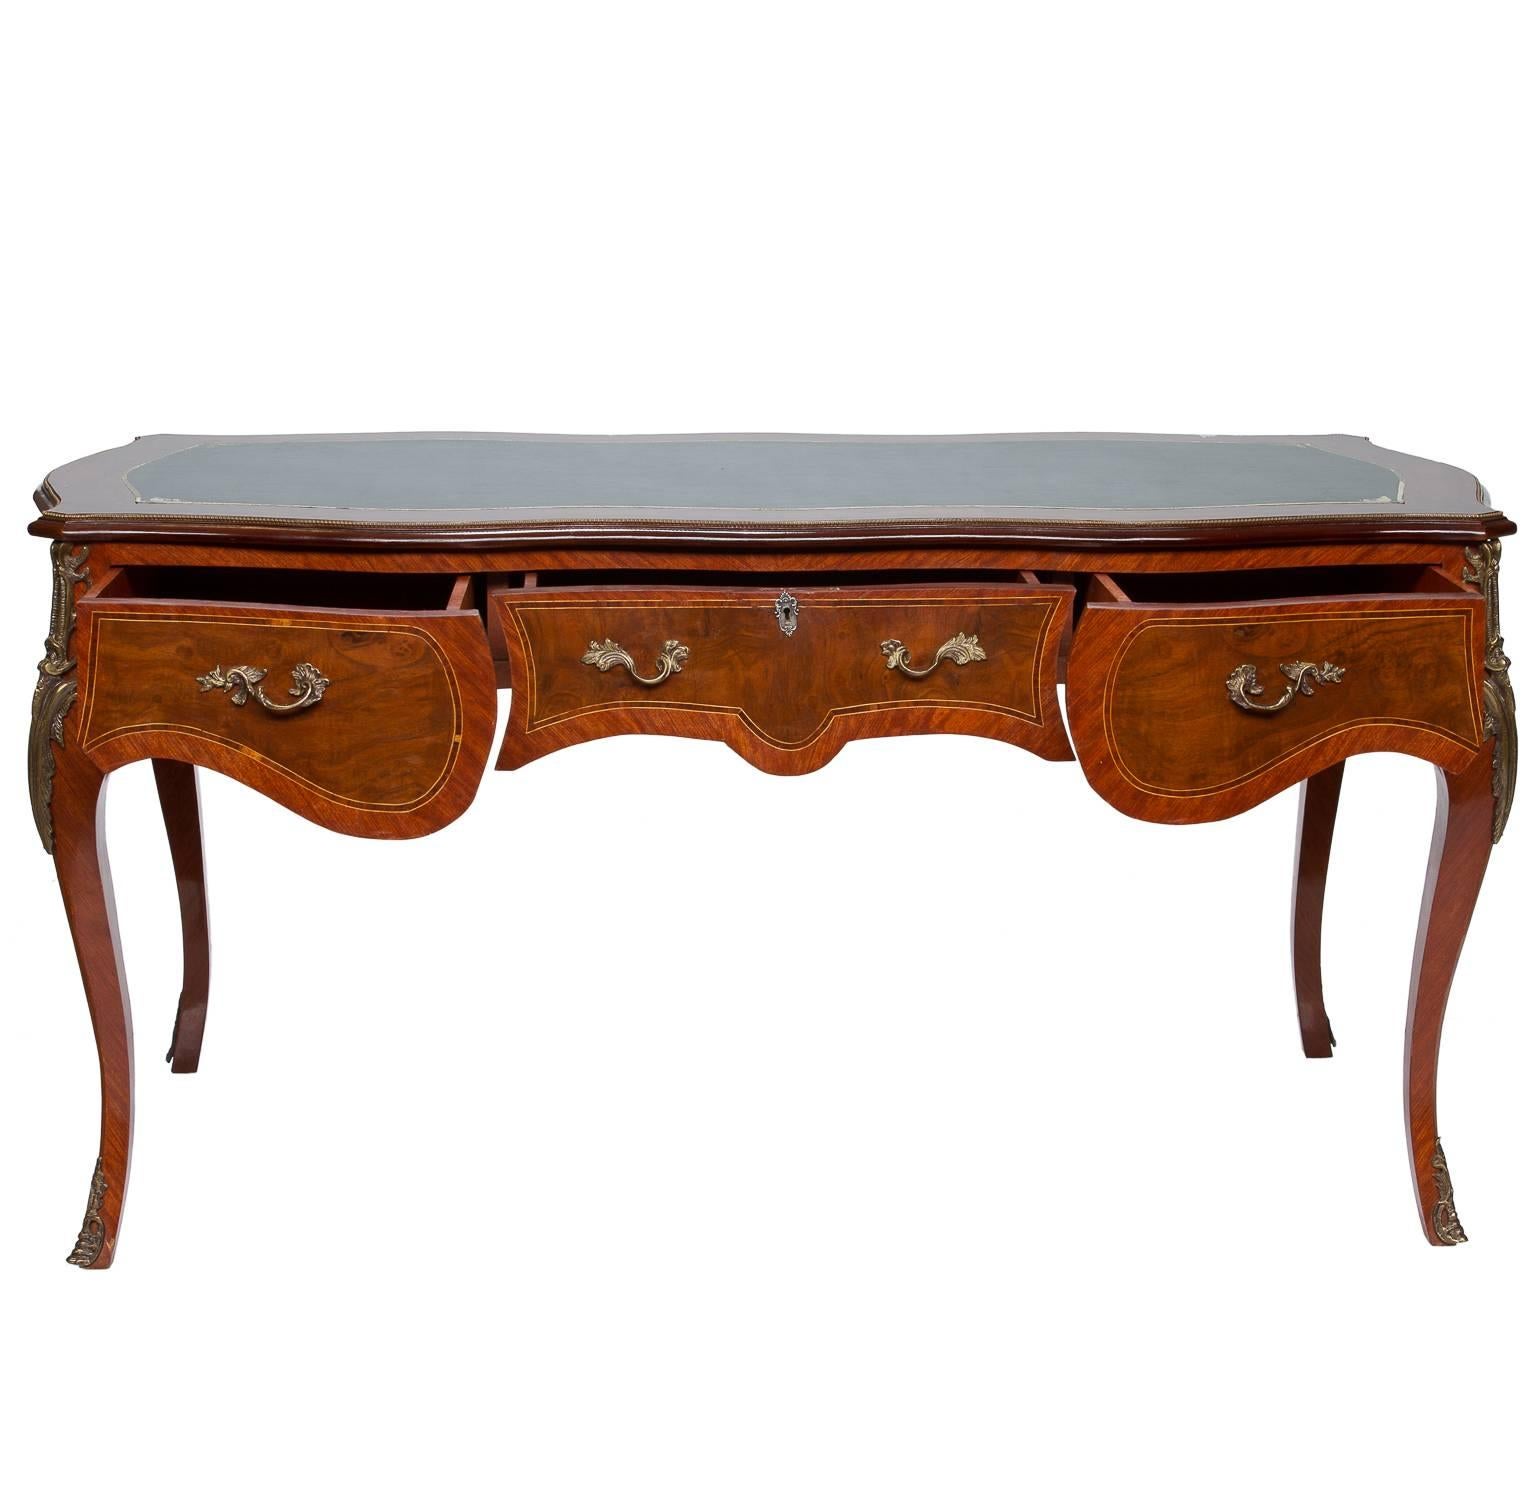 A Louis XV kingswood and burl walnut bureau plat from France. The four sides are shaped bombé style and inlaid to highlight the wood patterns. There is one fictional side with a set of three drawers. The drawers have nice ormolu Baroque handles.